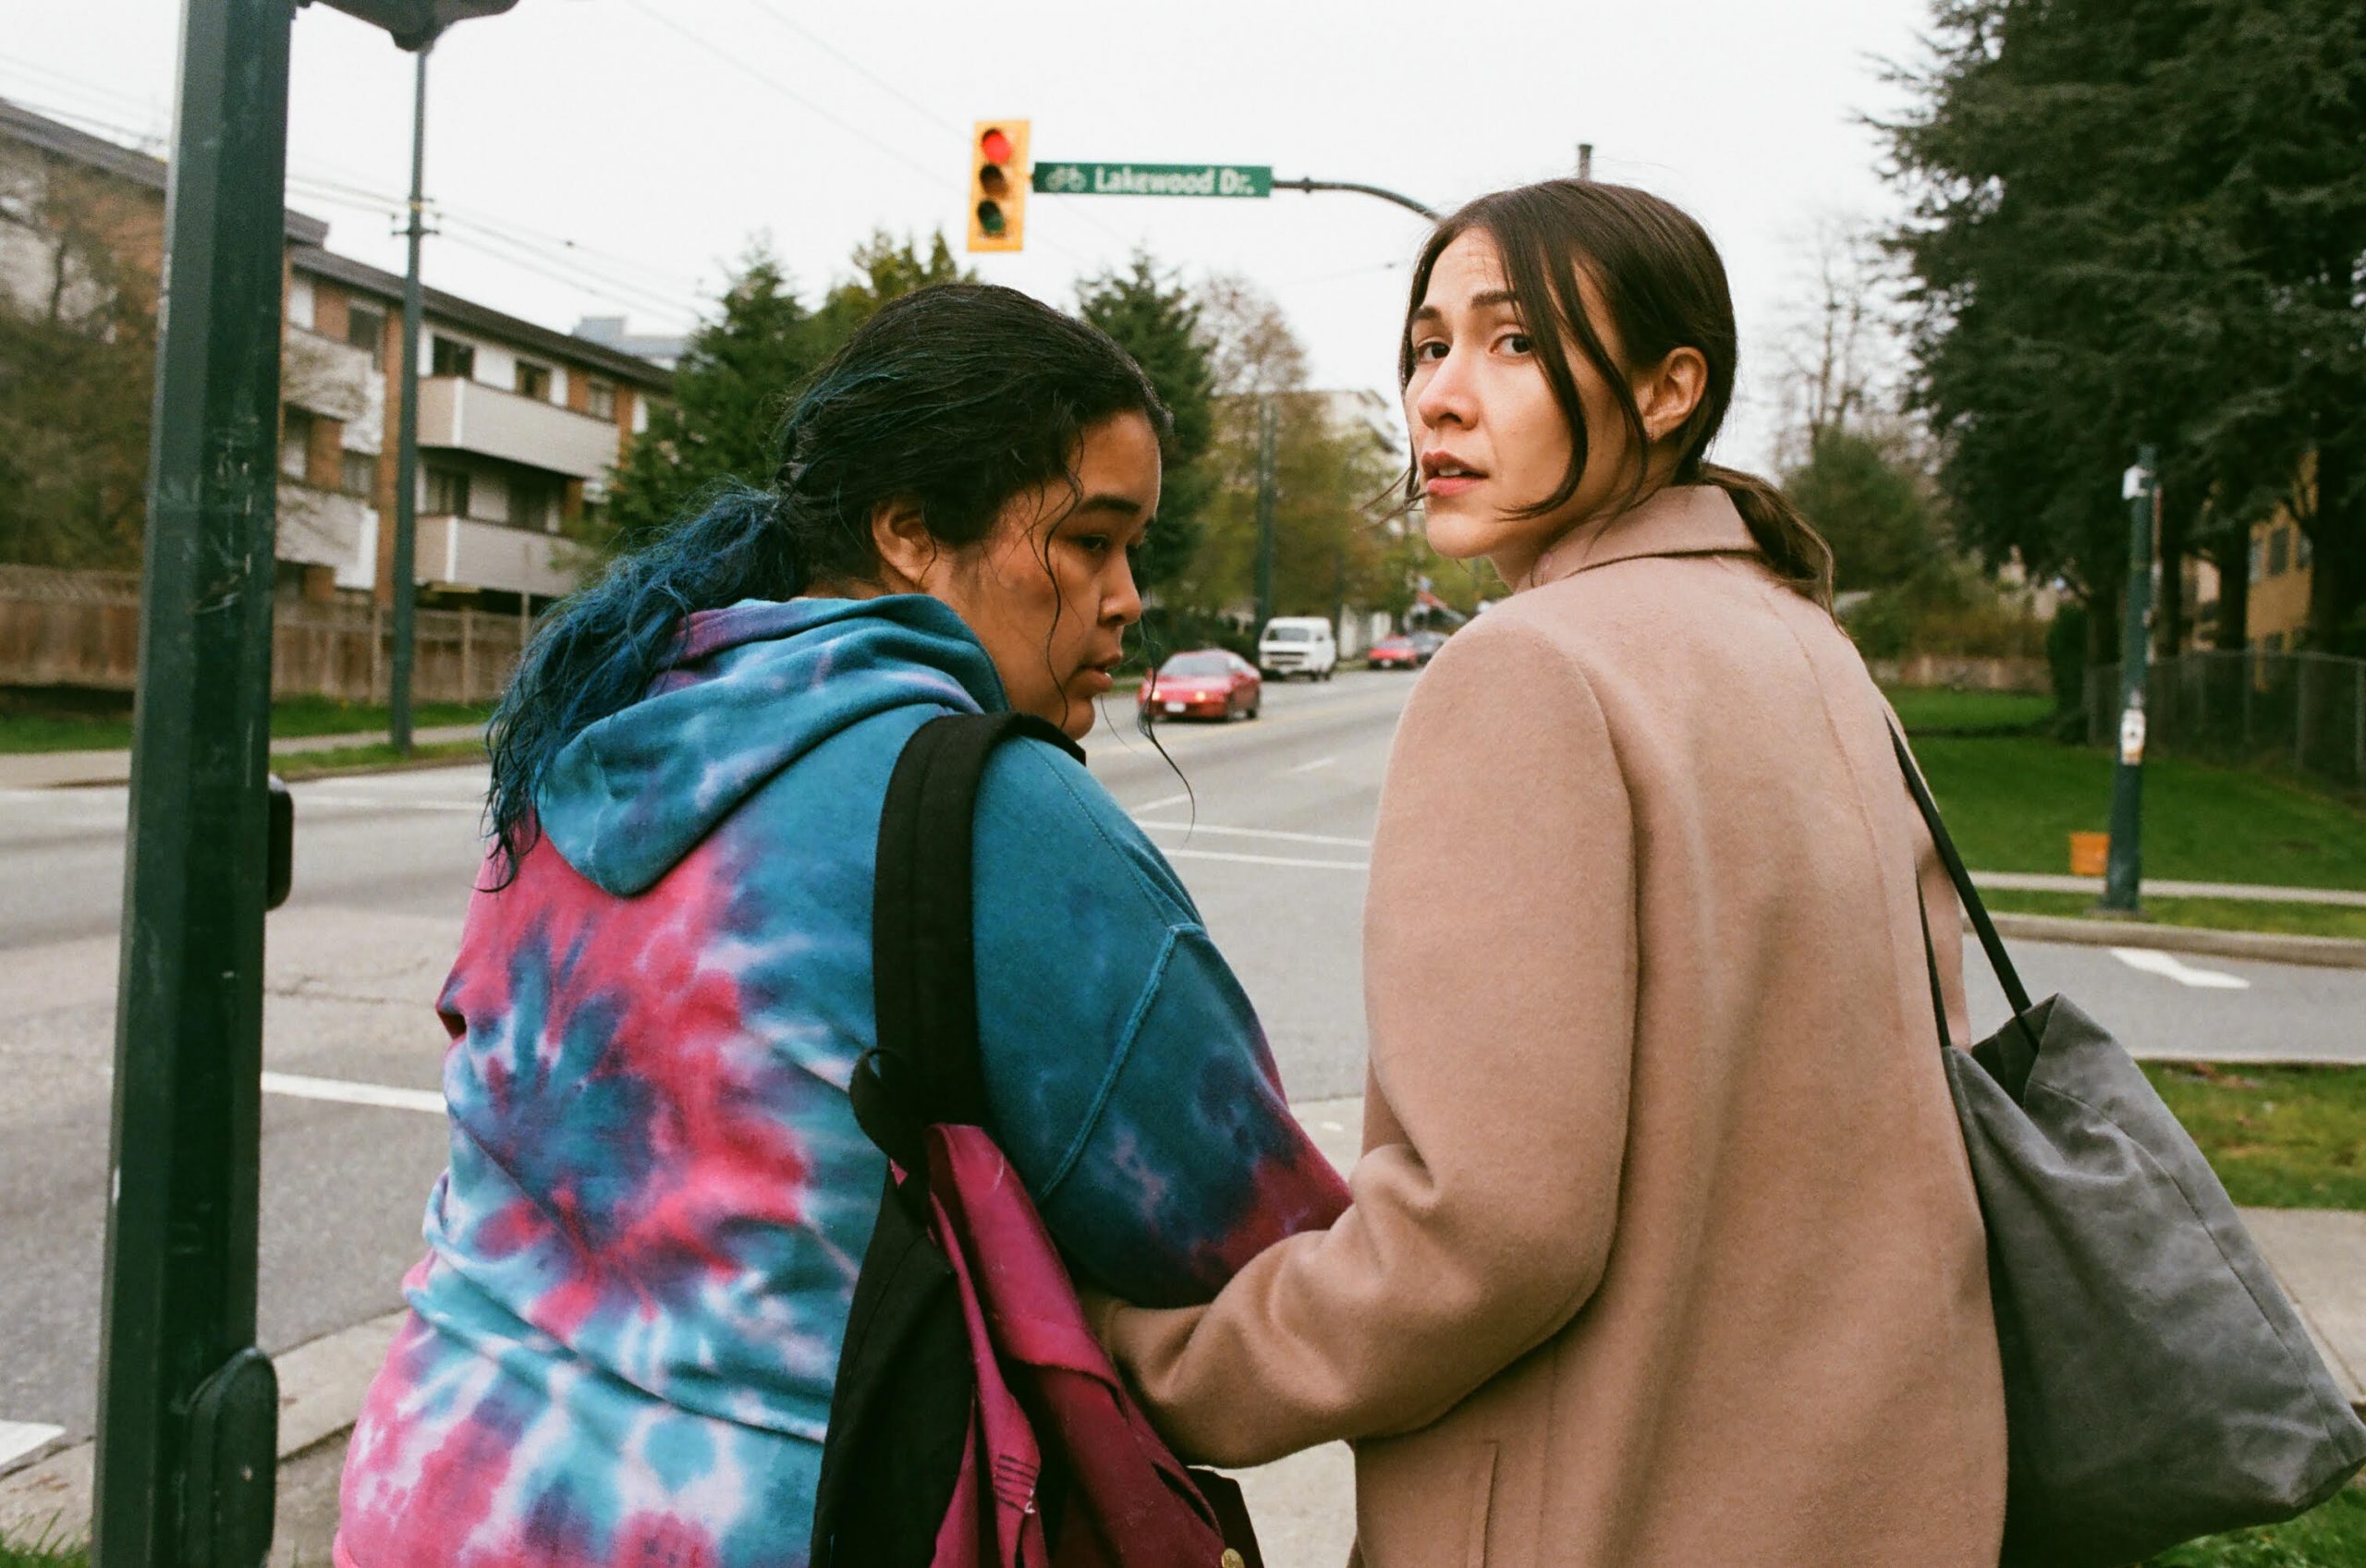 Two women linking arms turn around as they walk down a street.